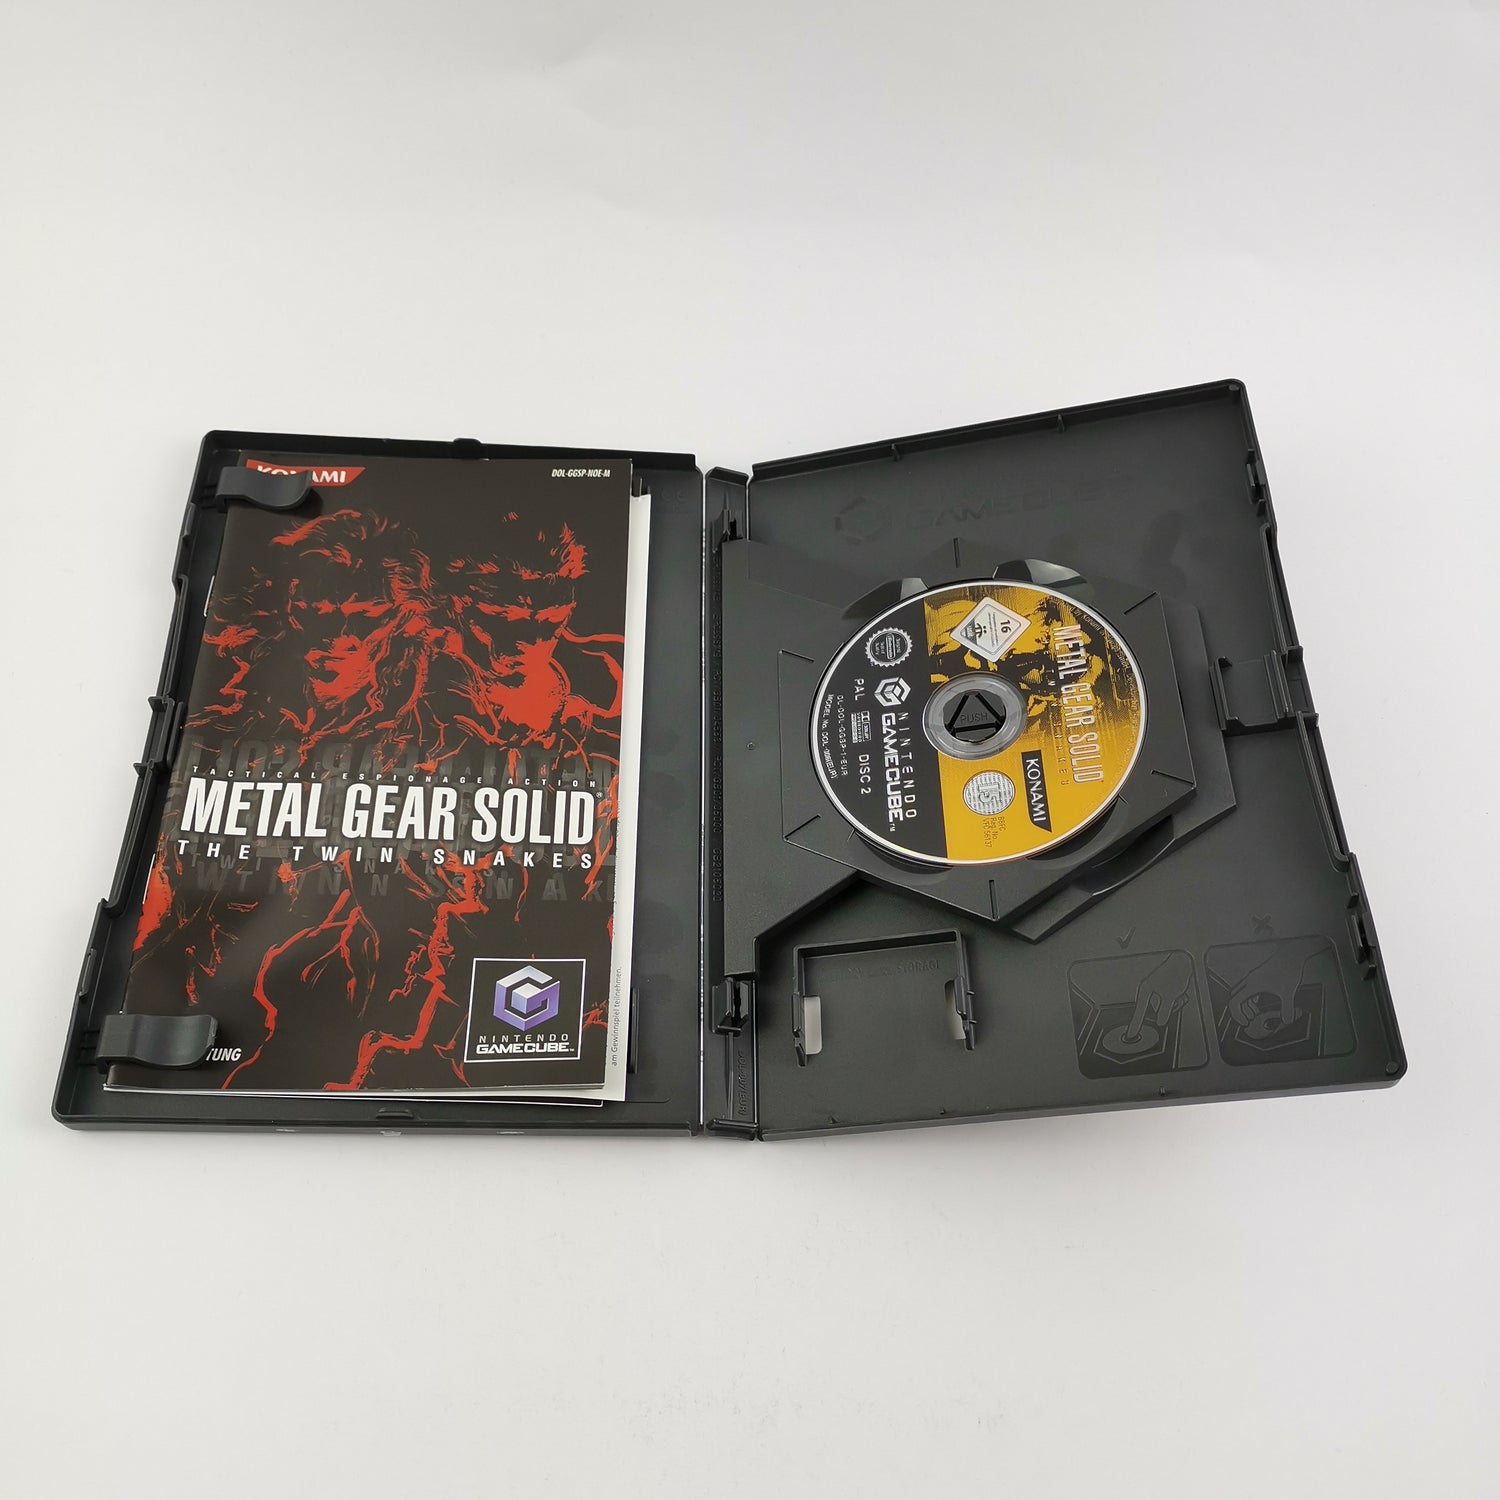 Nintendo Gamecube Game: Metal Gear Solid The Twin Snakes - OVP Instructions PAL